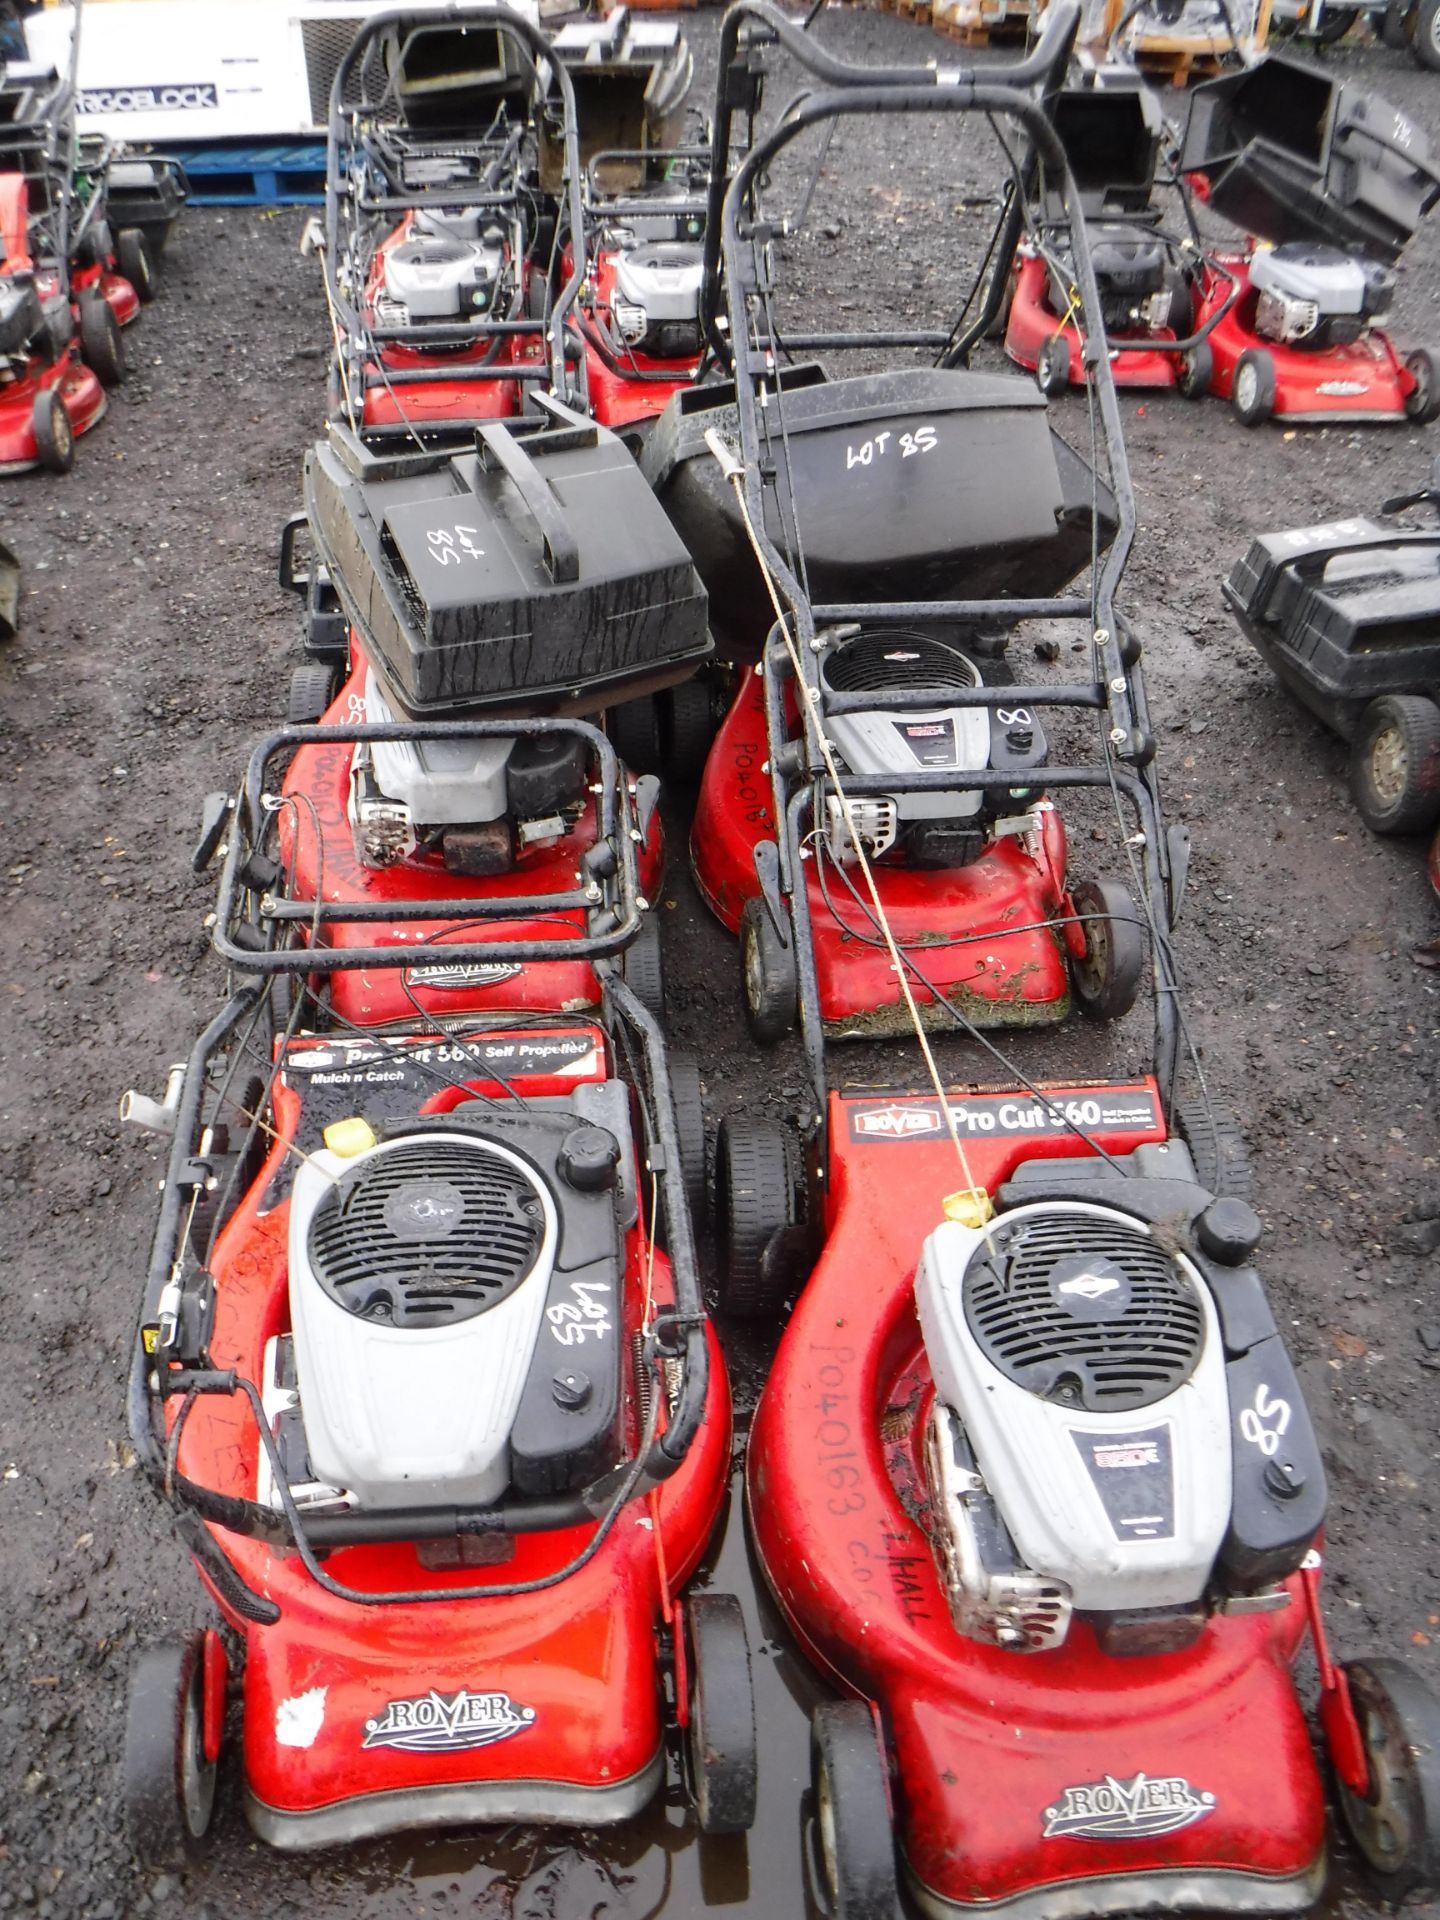 ROVER PRO CUT 560 x 4 self propelled mowers c/w 4 boxes